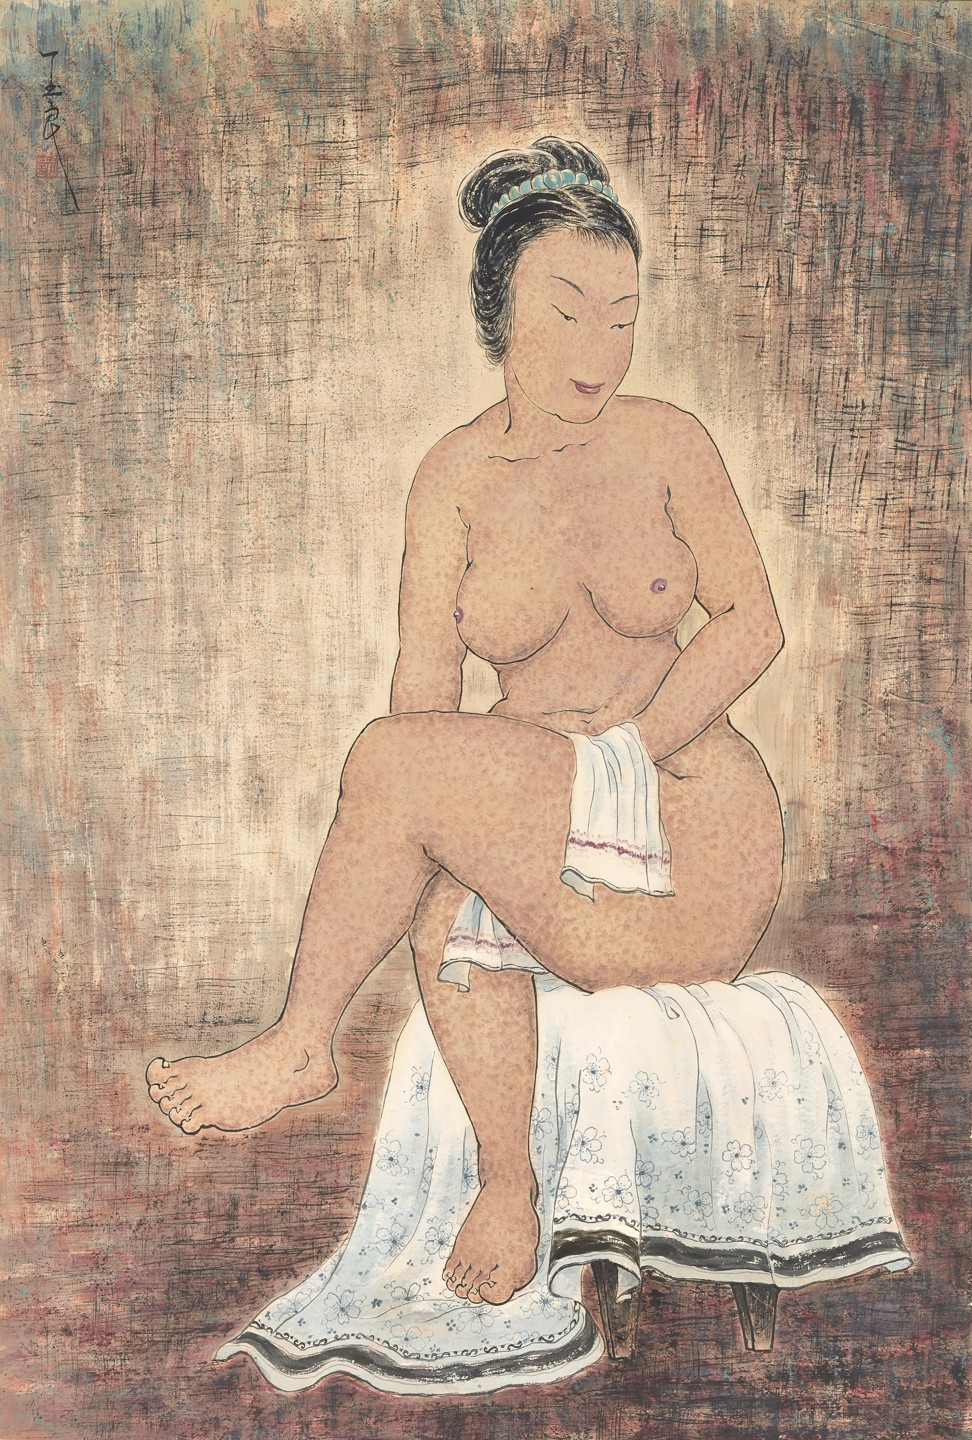 Pan Yuliang’s ‘Seated Nude’, in ink and colour on paper.